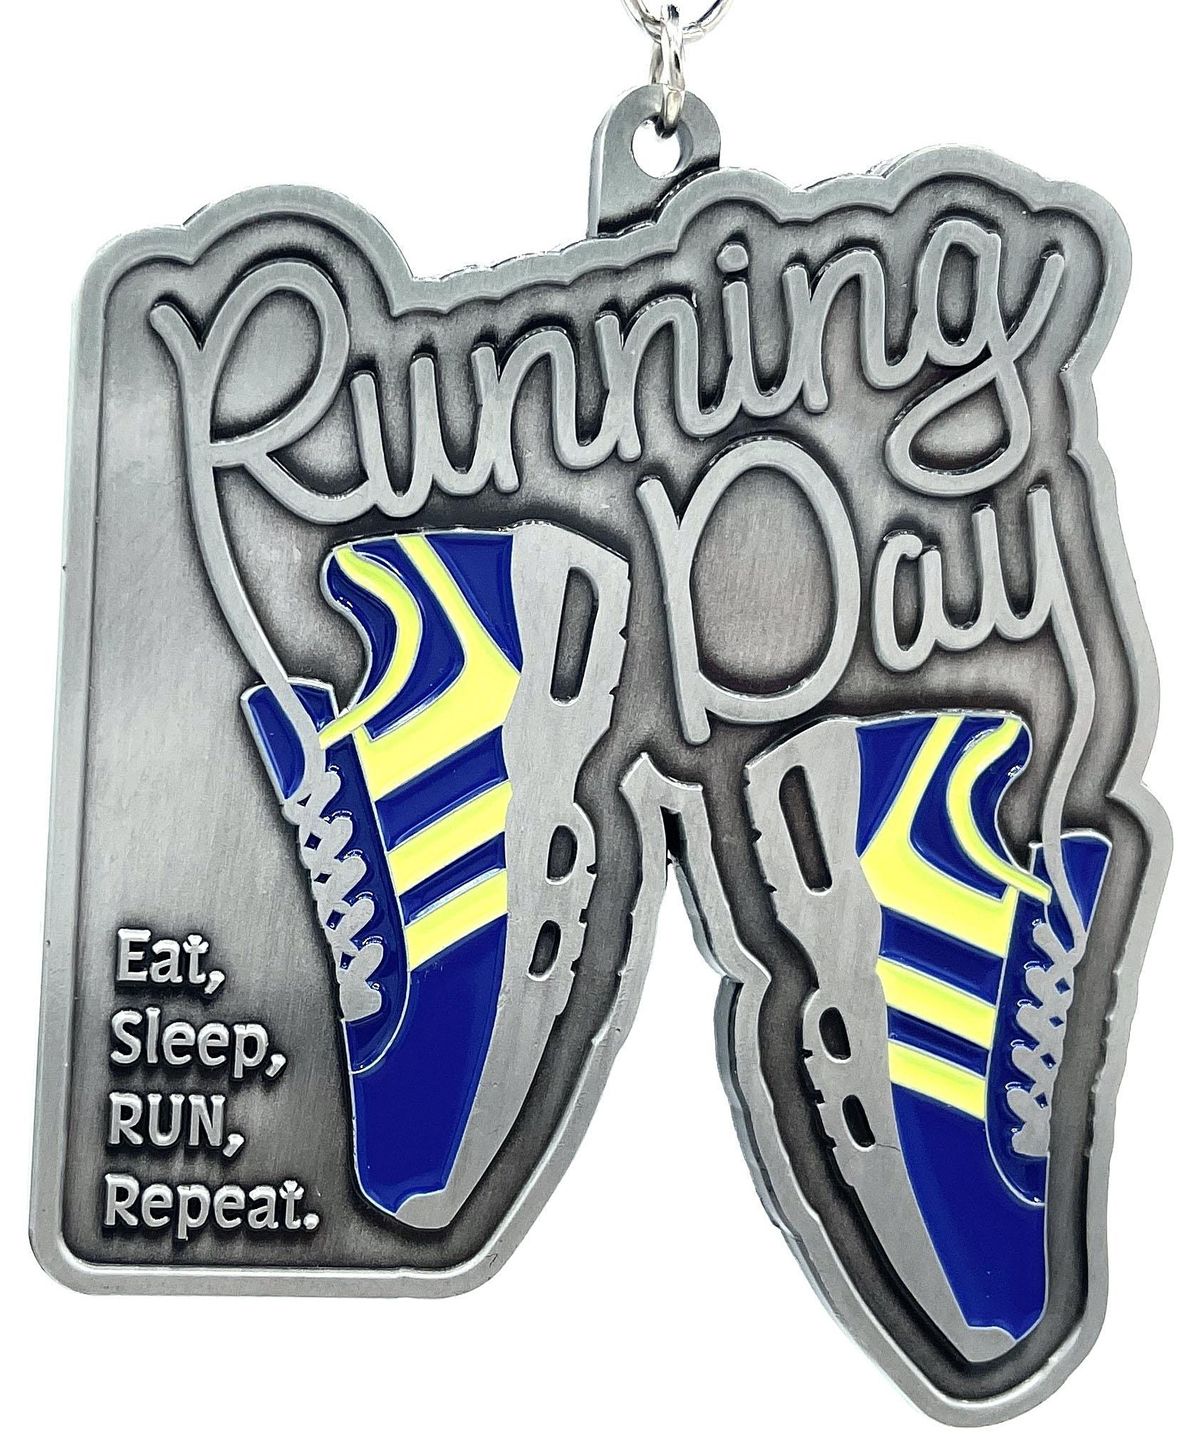 Running Day 1M 5K 10K 13.1 26.2-Participate from Home. Save $10 Now!